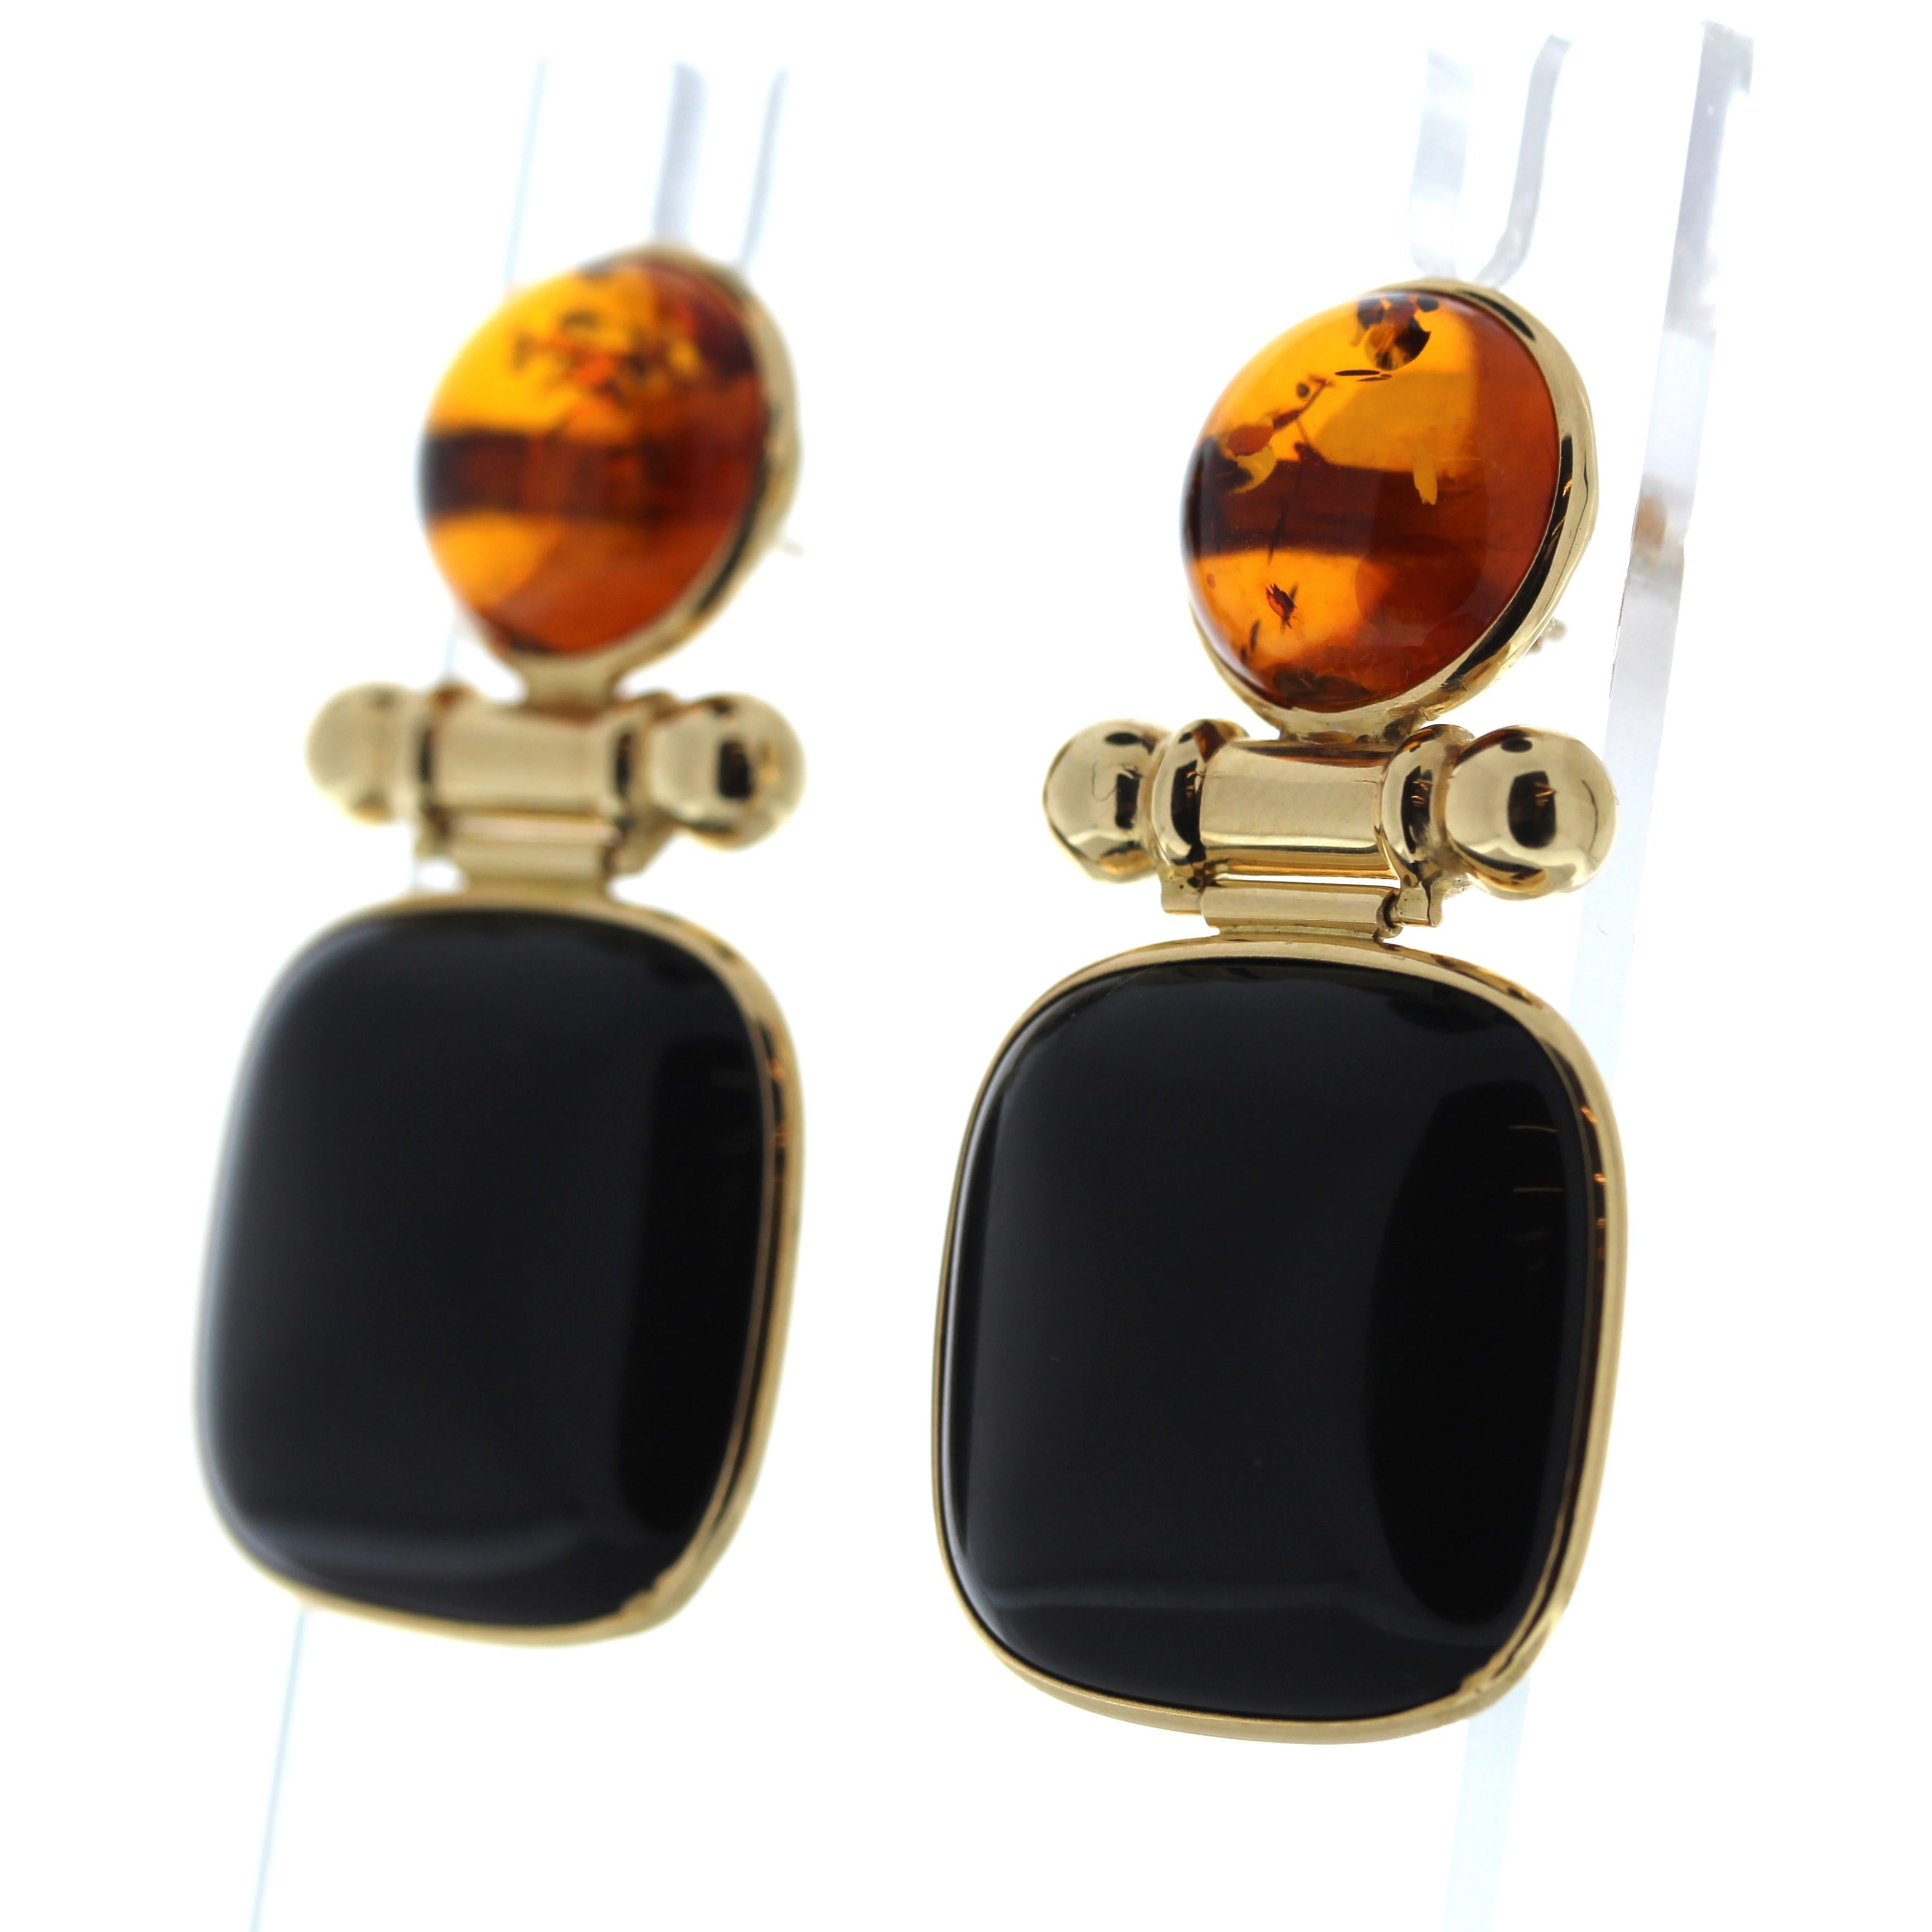 25 Carat Total Mixed Gem Stone Earrings in 14k Yellow Gold In New Condition For Sale In Chicago, IL